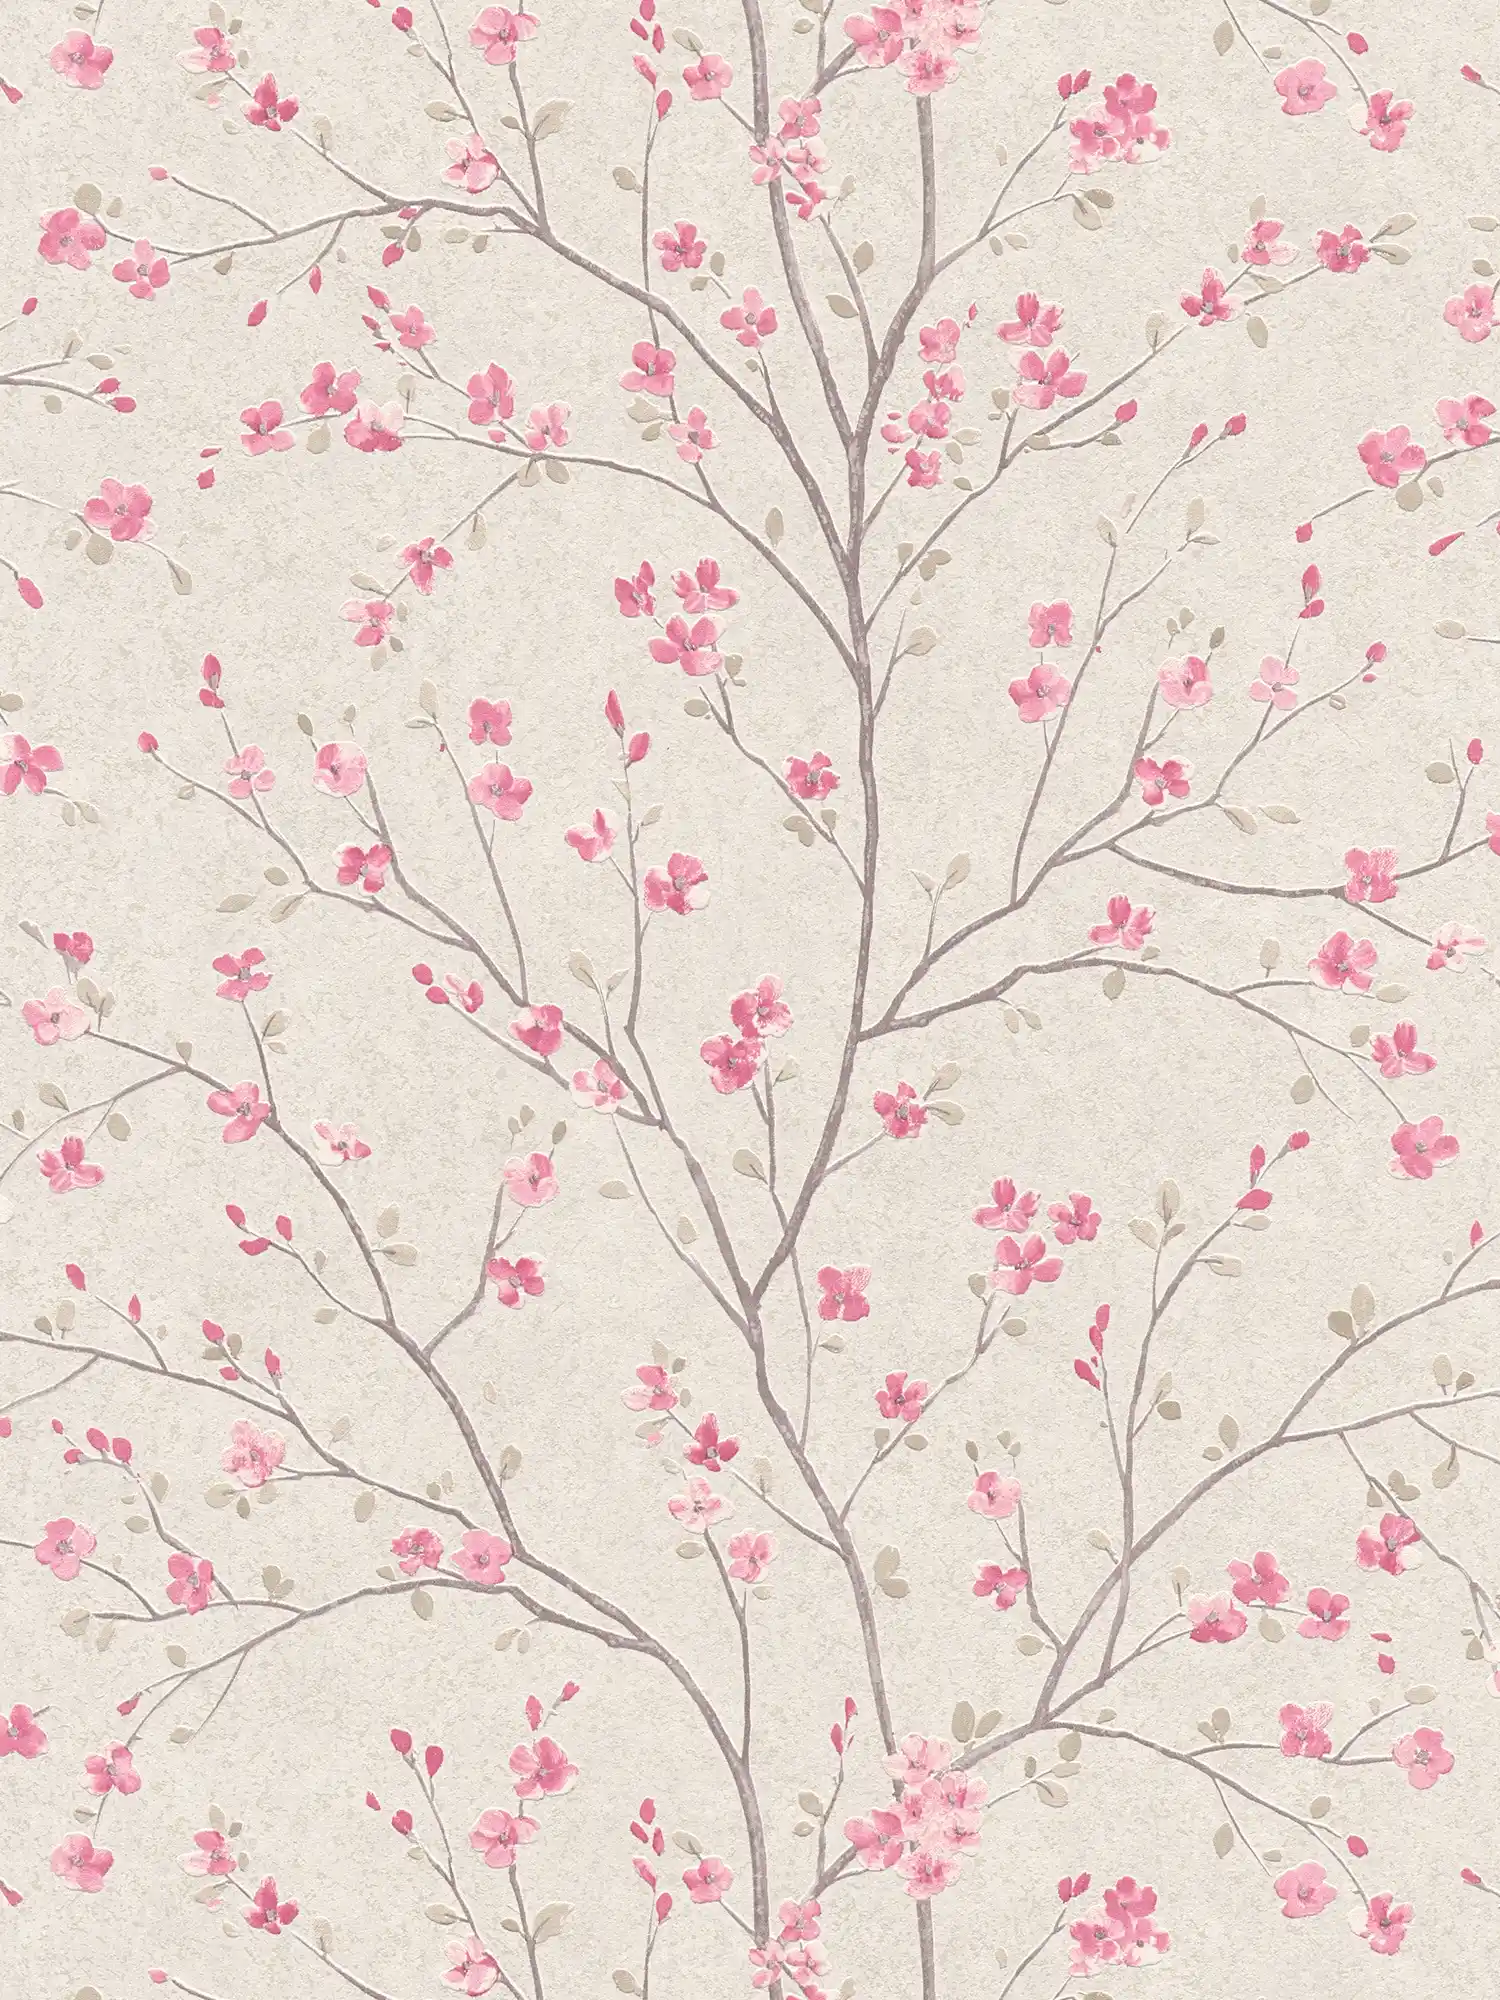 Non-woven wallpaper with cherry blossom design in Asian style - brown, pink, white
